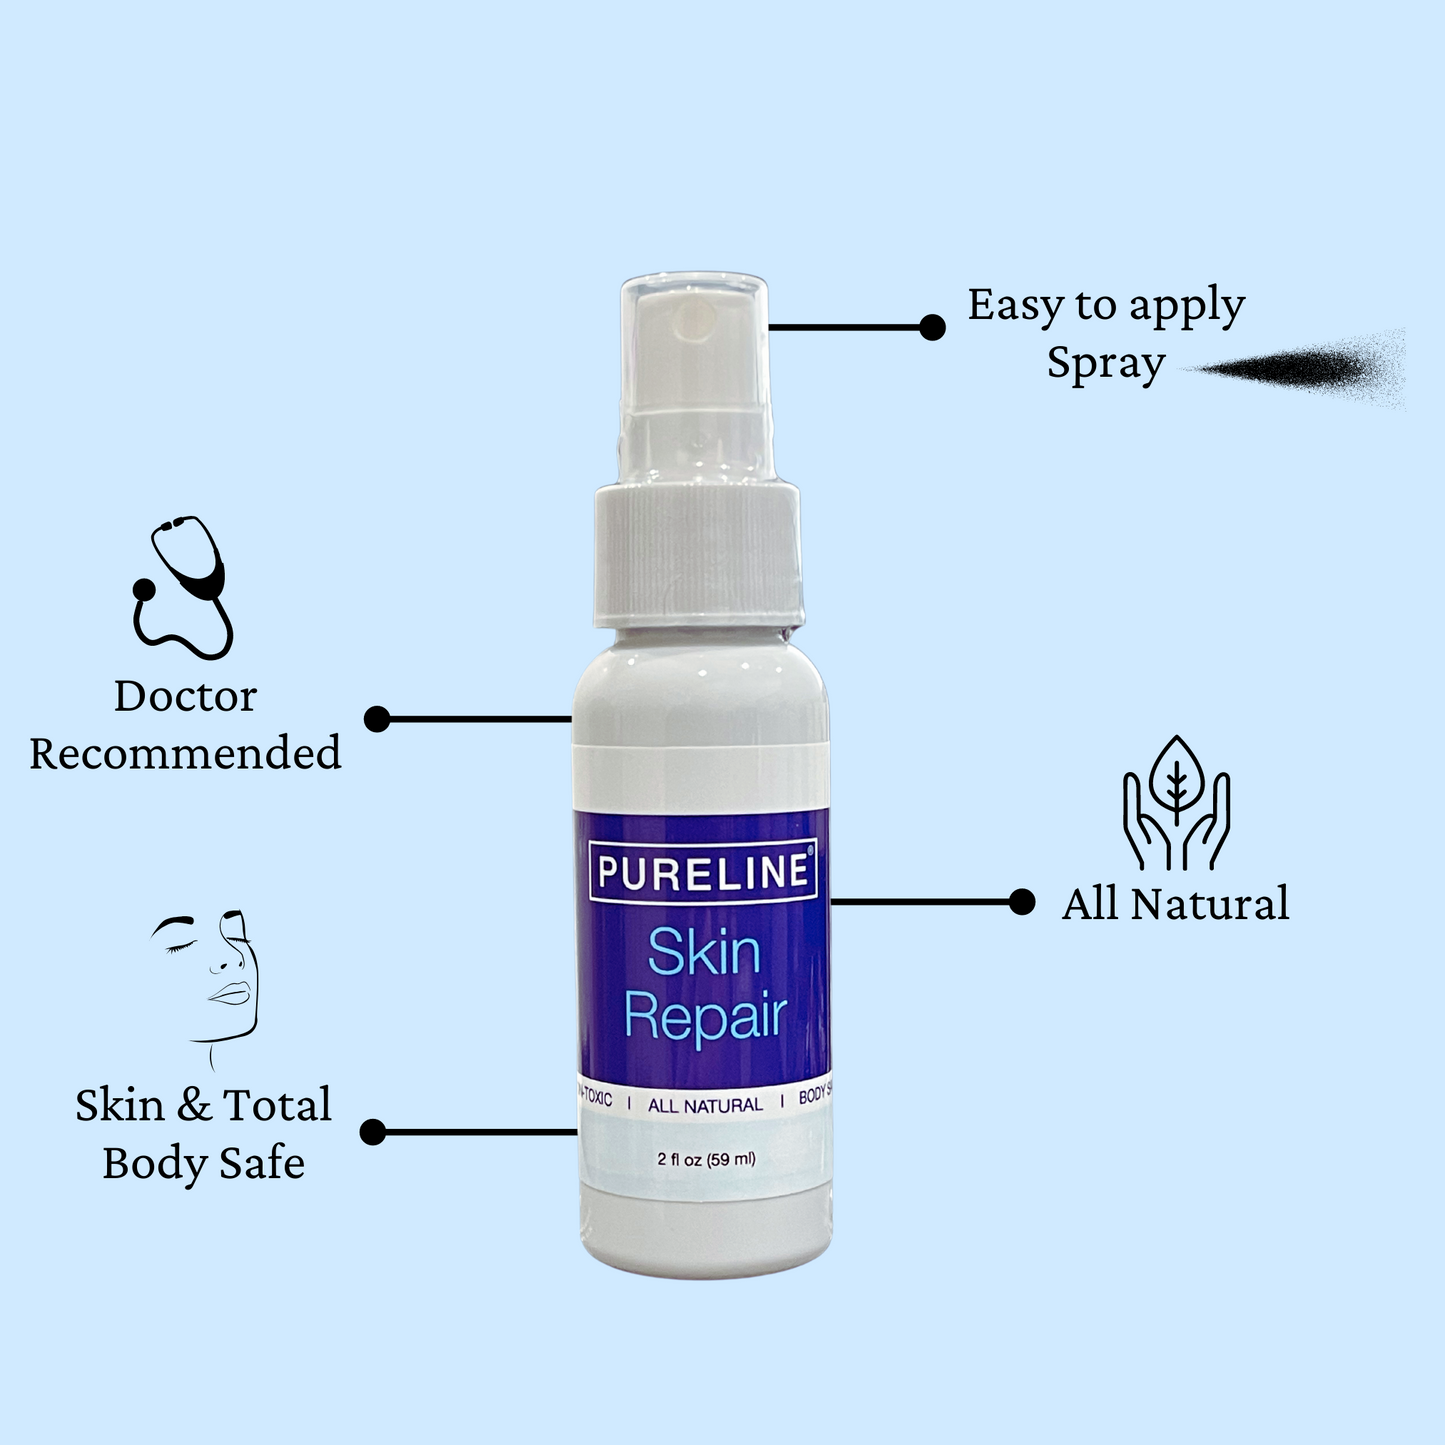 PURELINE Skin Repair – Non-Toxic Wound Healing Skin Care Ointment